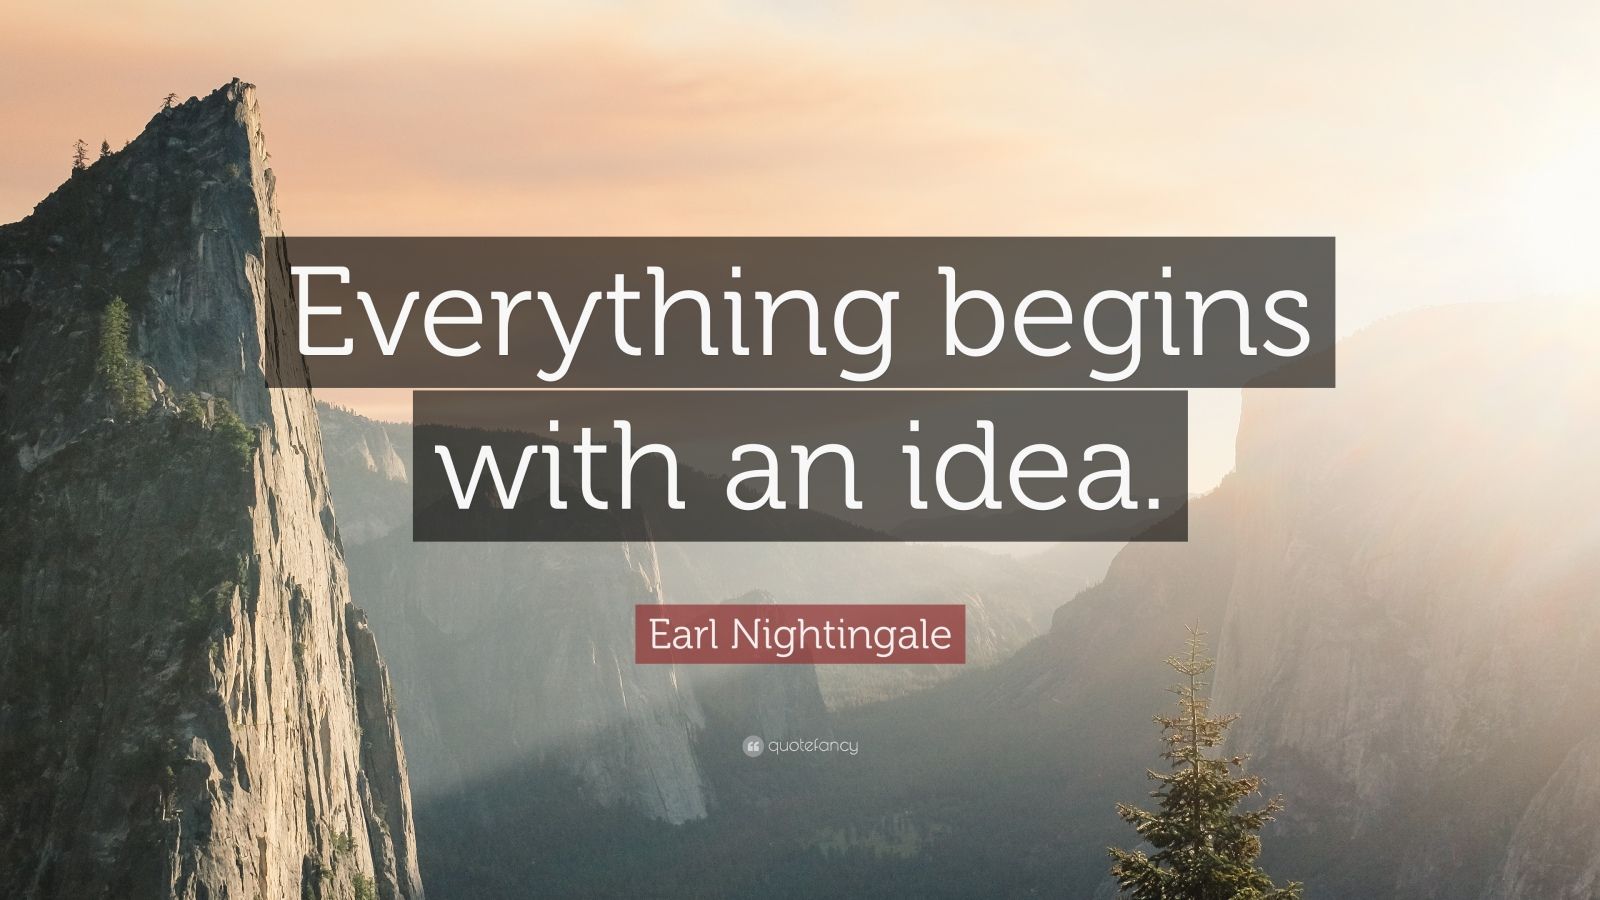 Earl Nightingale Quote: “Everything begins with an idea.” (12